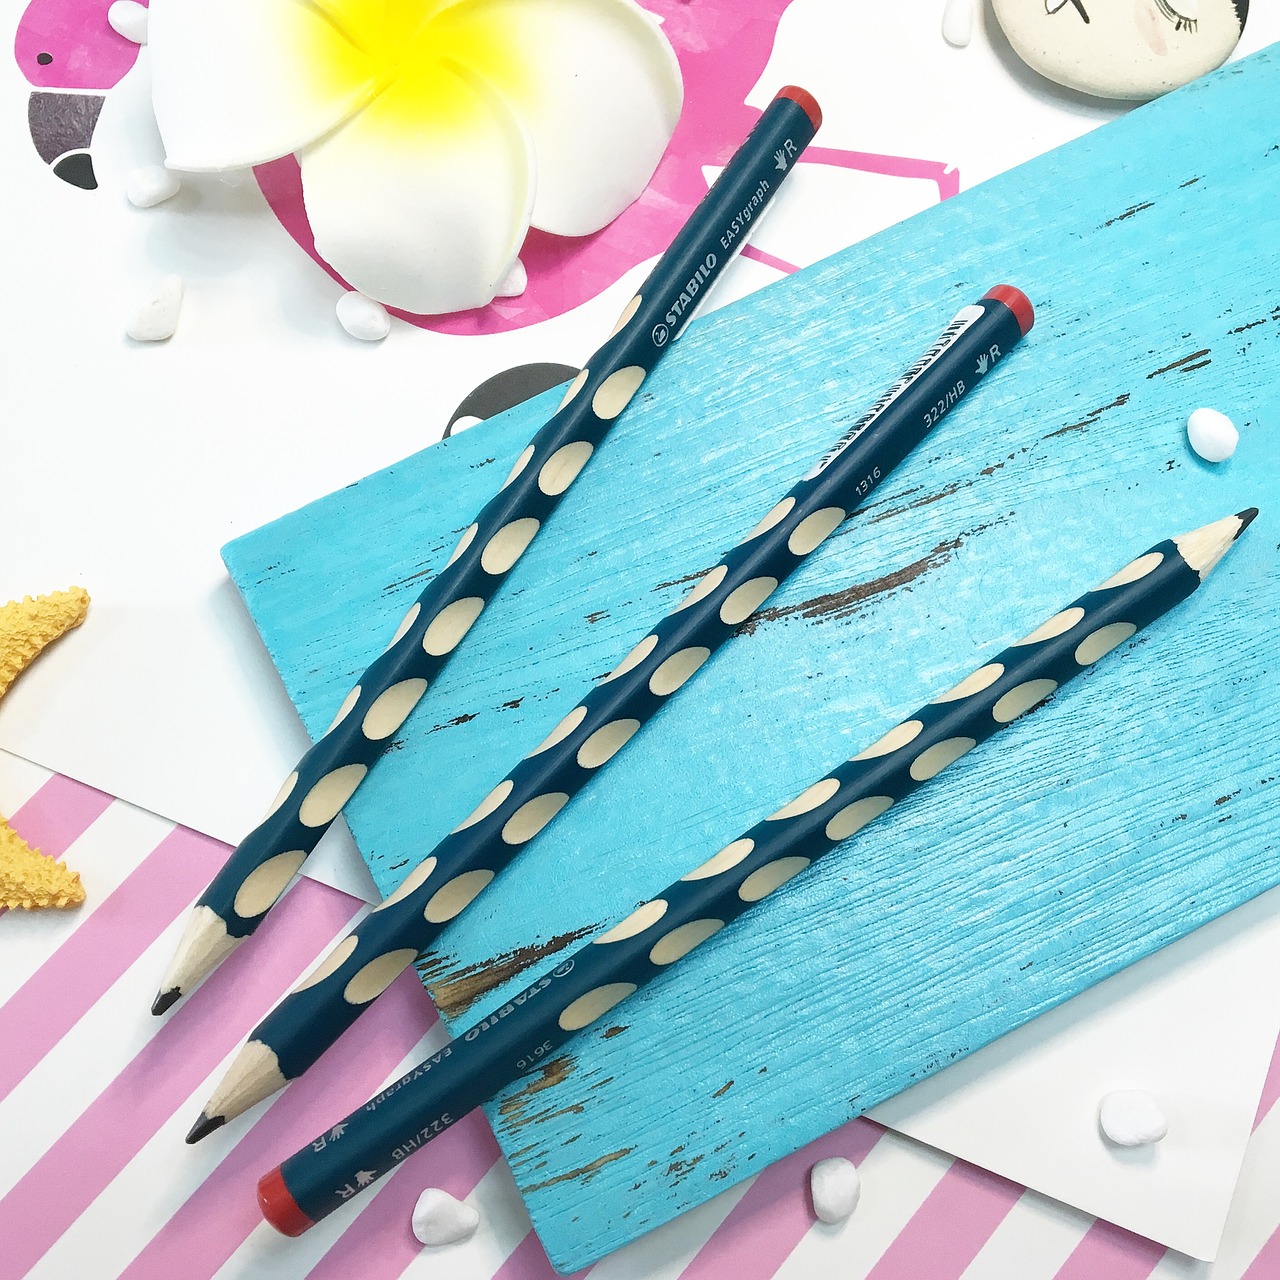 stabilo stationery hold a pencil music pencil free photo